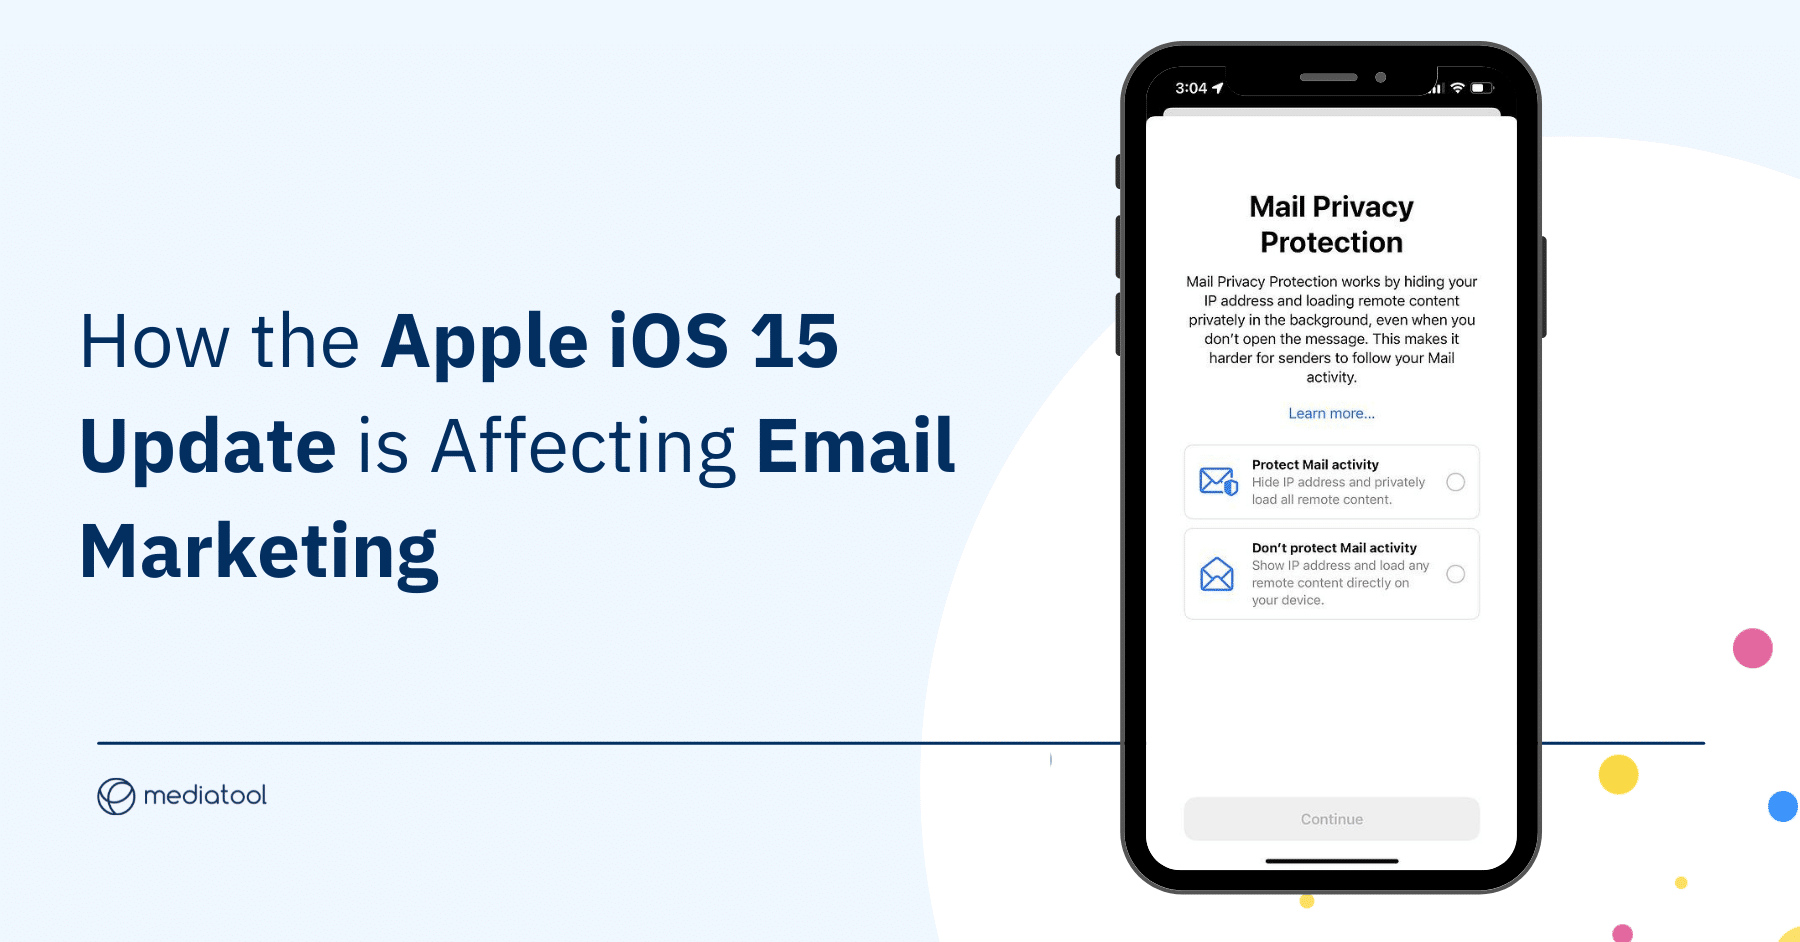 Apple's iOS 15 Impact on Email Marketing: How Marketers Can Adapt